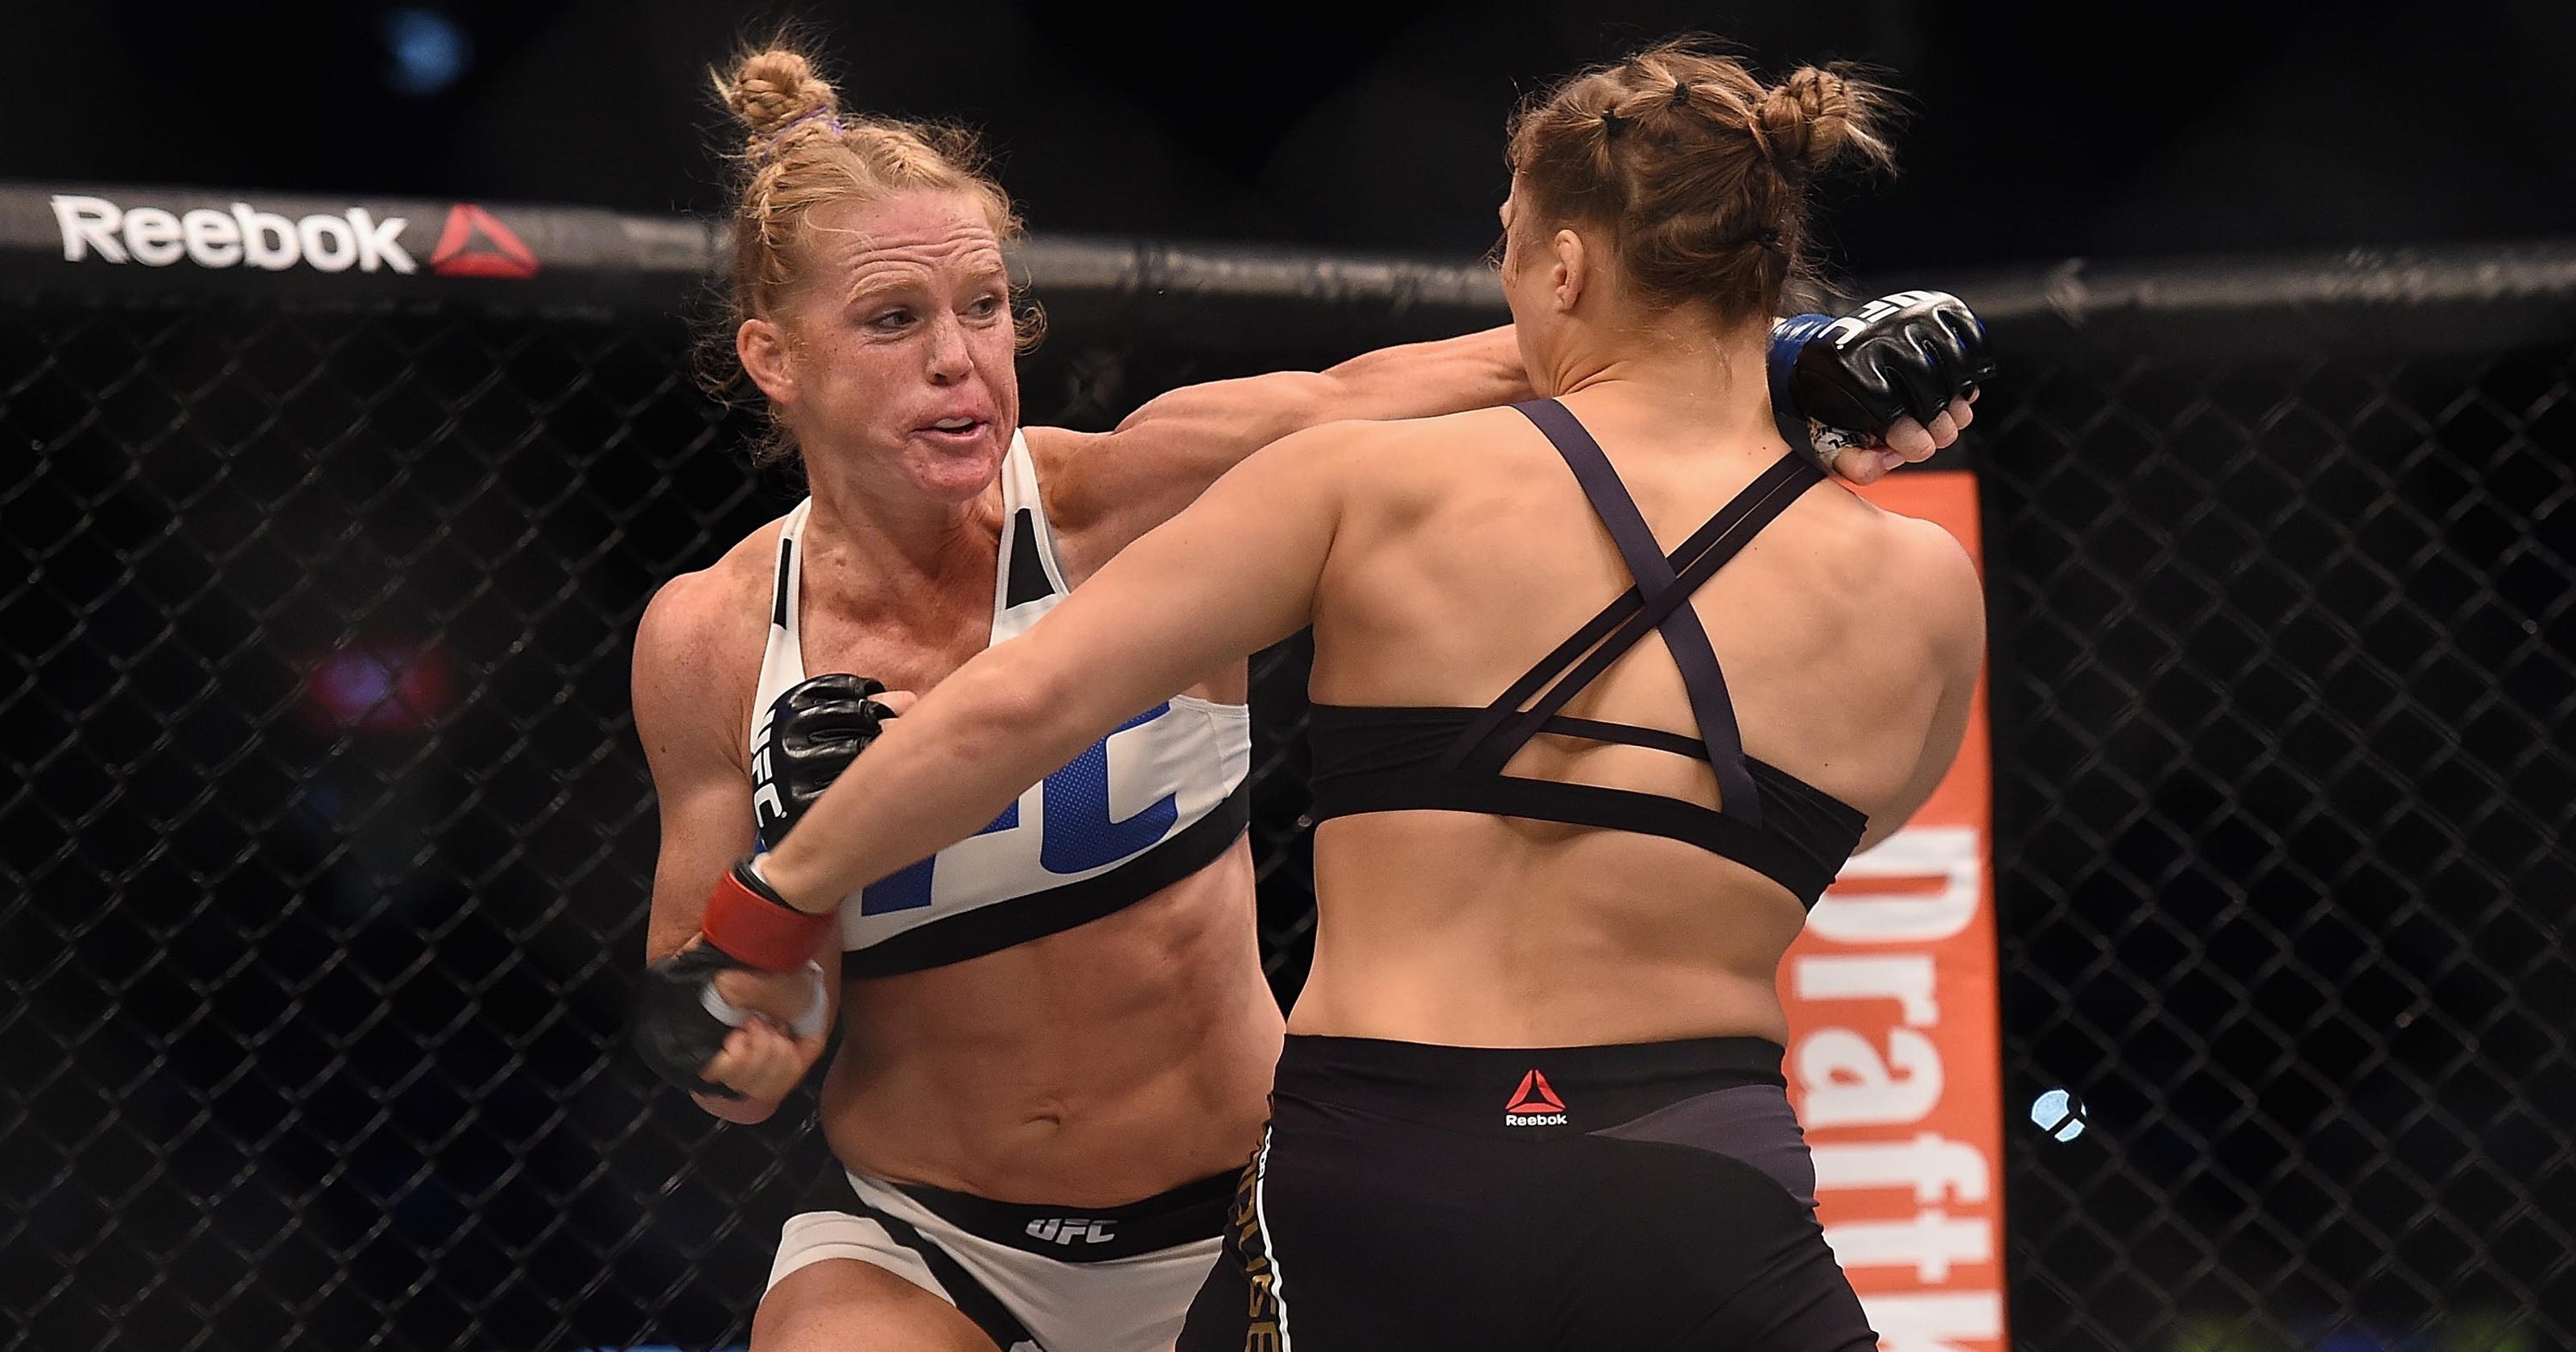 Holly Holm's team won 'six figure' sum betting on their fighter3200 x 1680